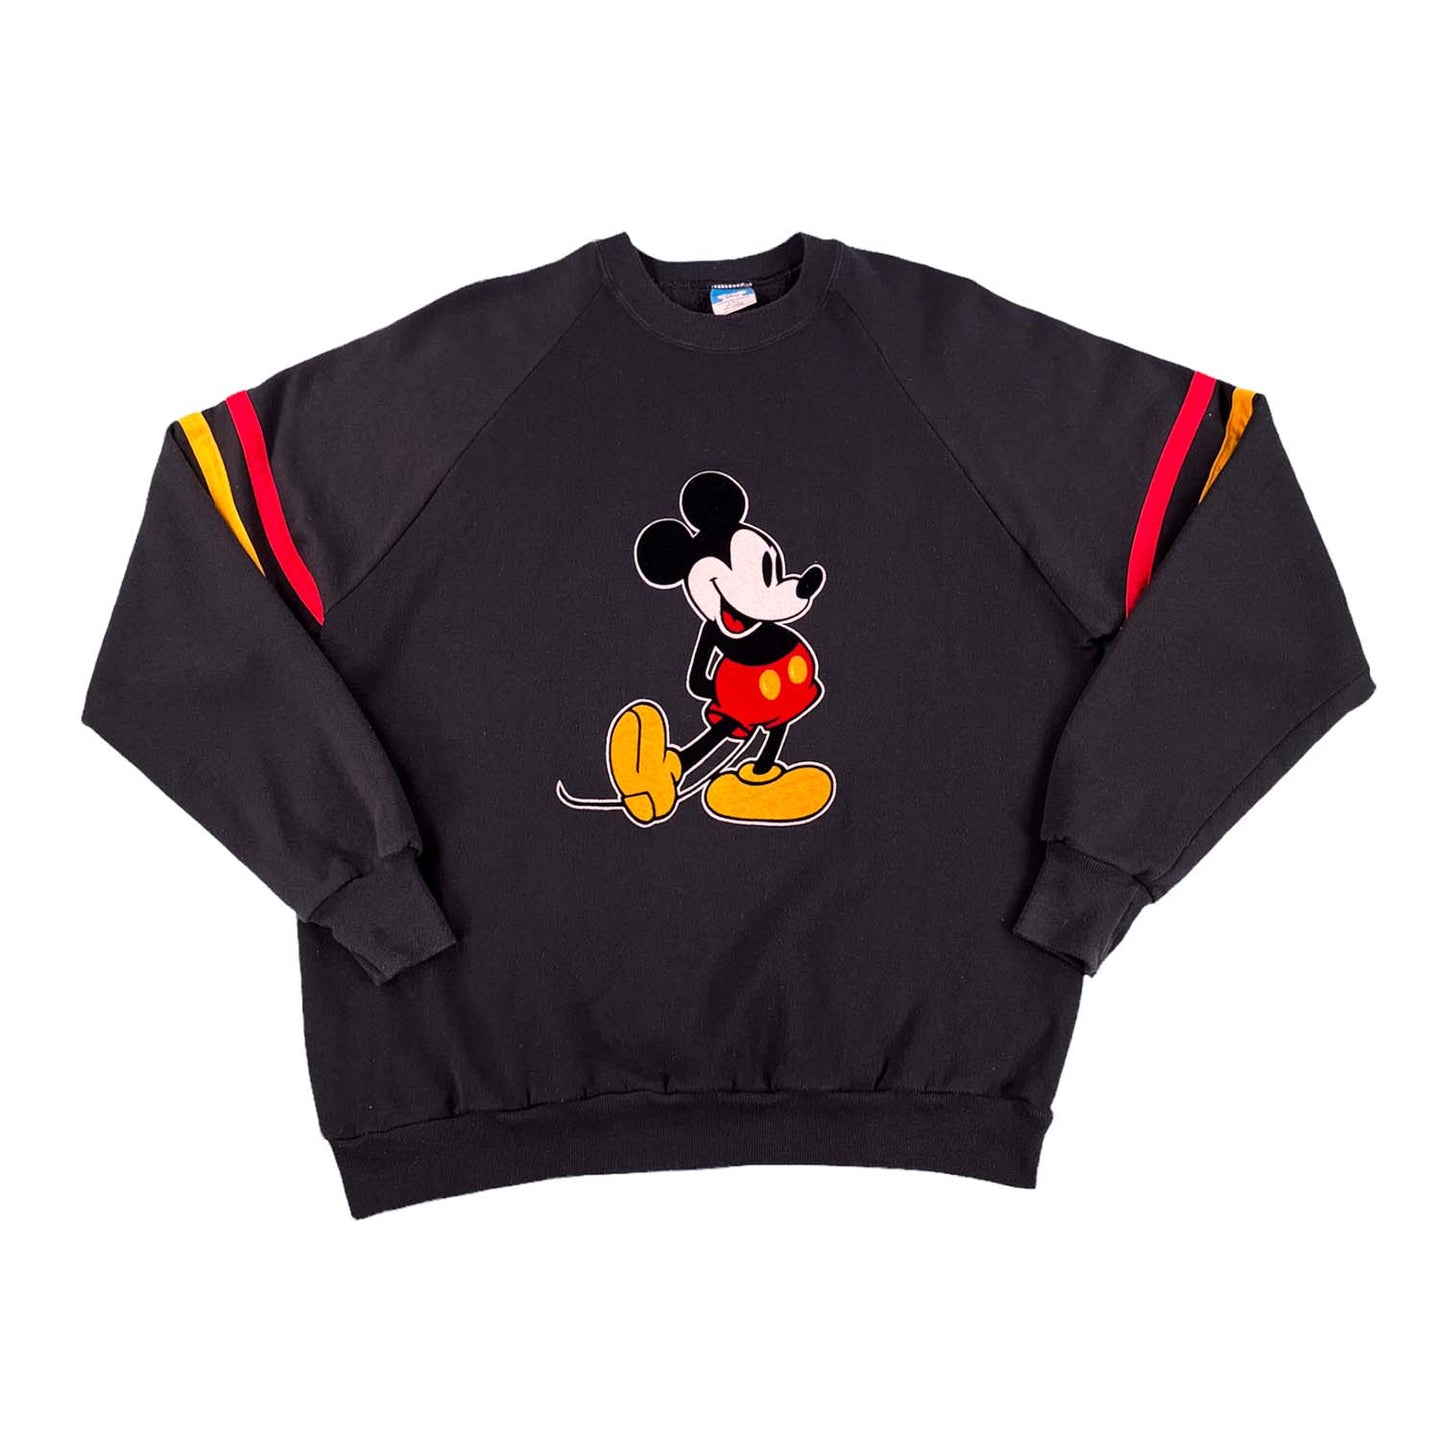 '80s Mickey Mouse classic crewneck XL